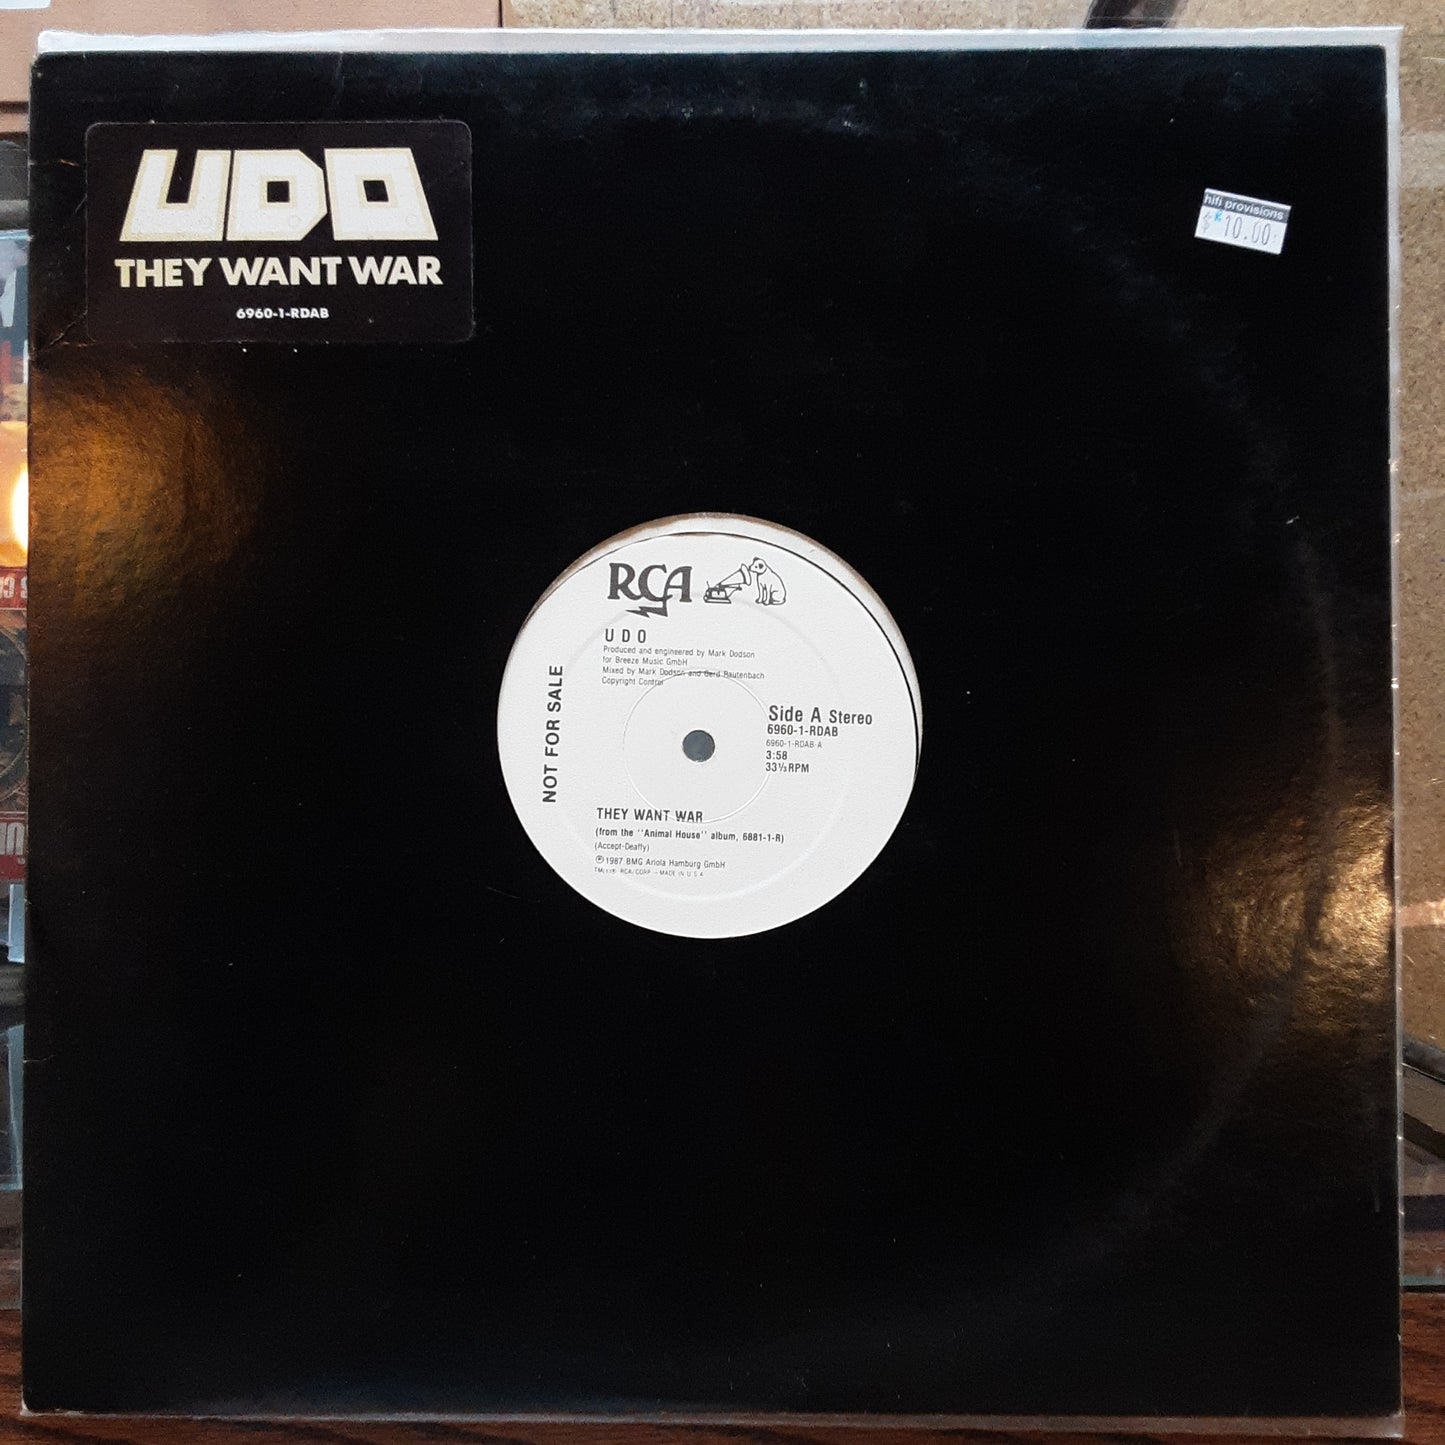 UDO - They Want War 12”